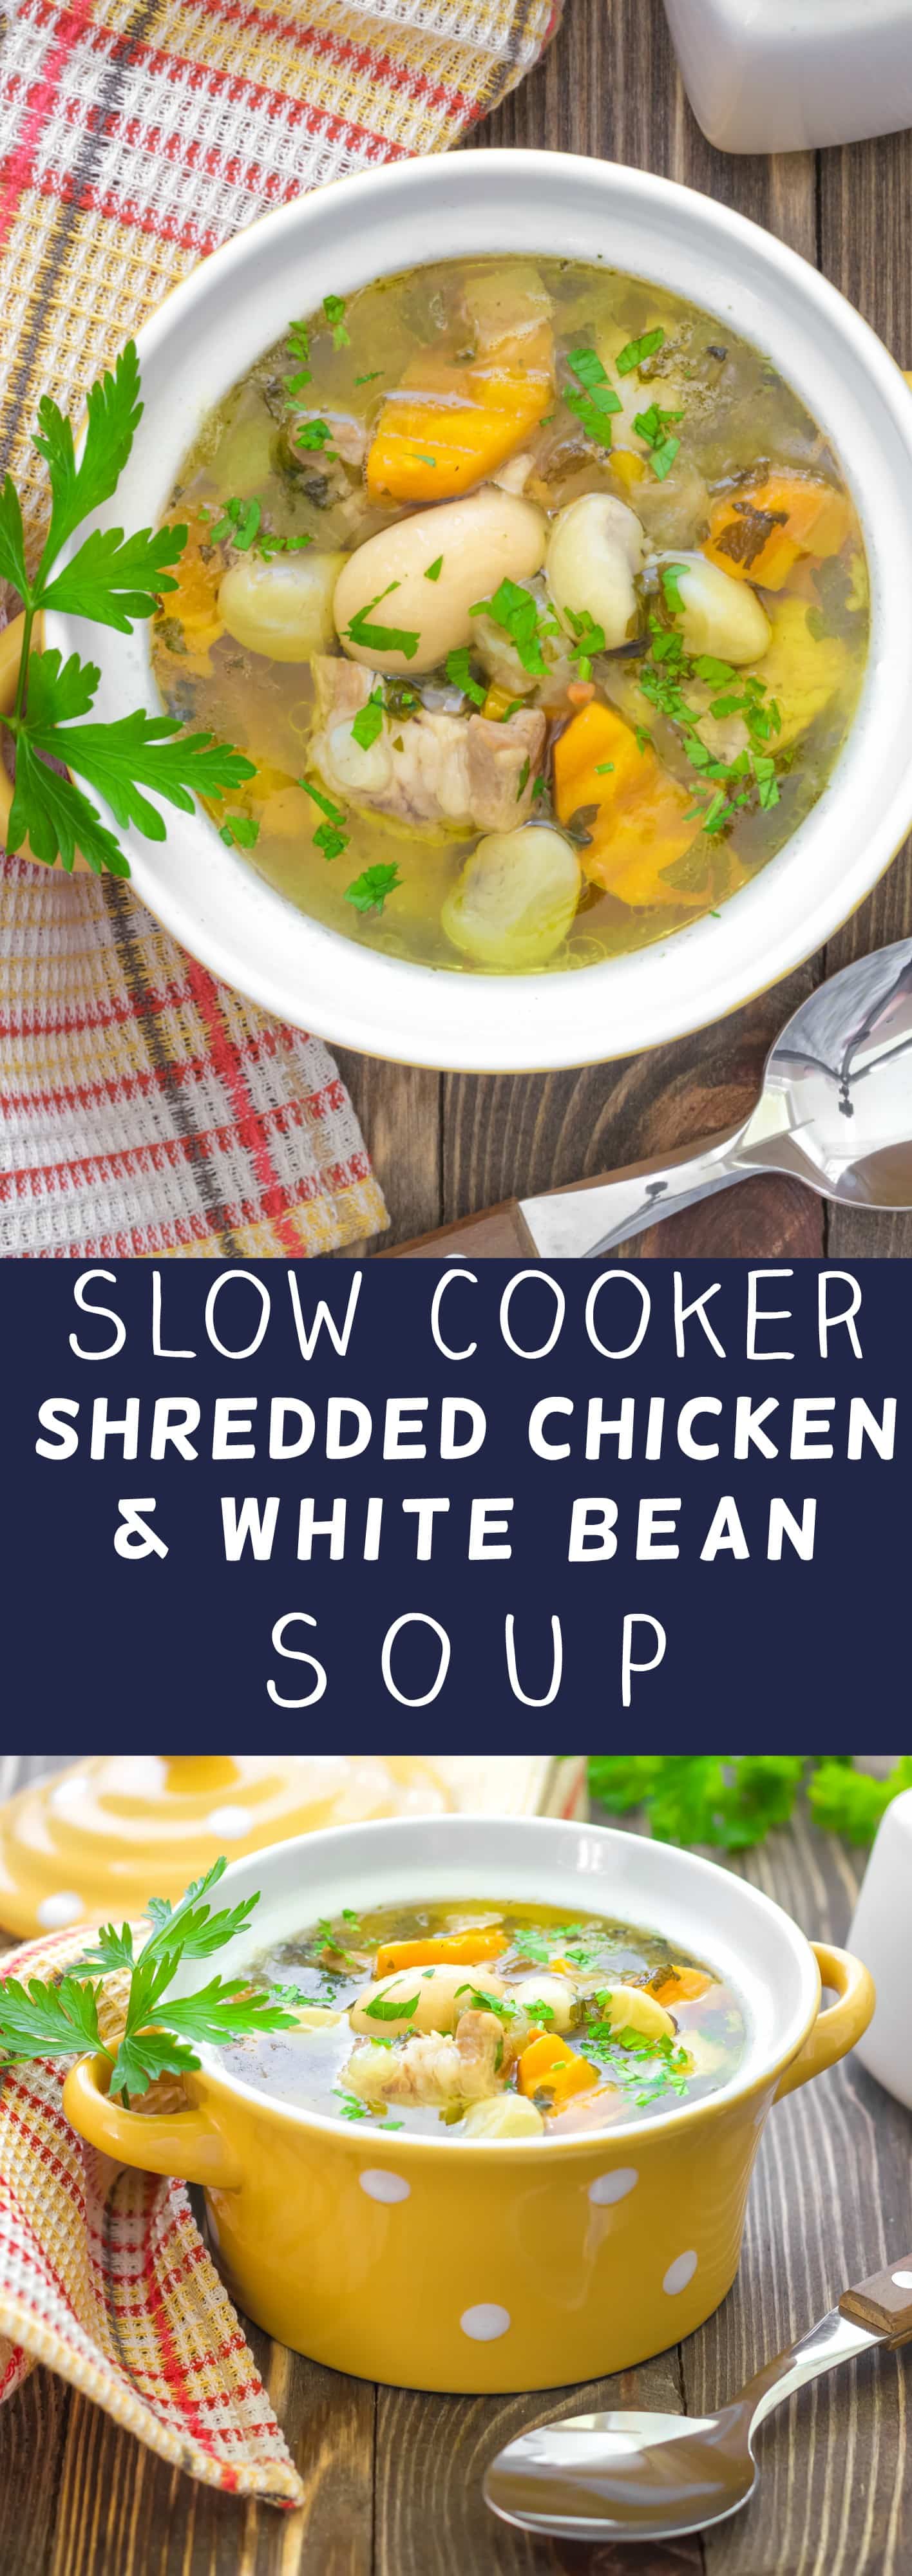 Slow Cooker Shredded Chicken and White Bean Soup is packed with healthy, hearty vegetables which is going to warm up your dinner table! This recipe is easy to make - throw all the ingredients in your crock pot for 8 hours and it's ready! Even better - this meal is economical and doesn't cost much to make!